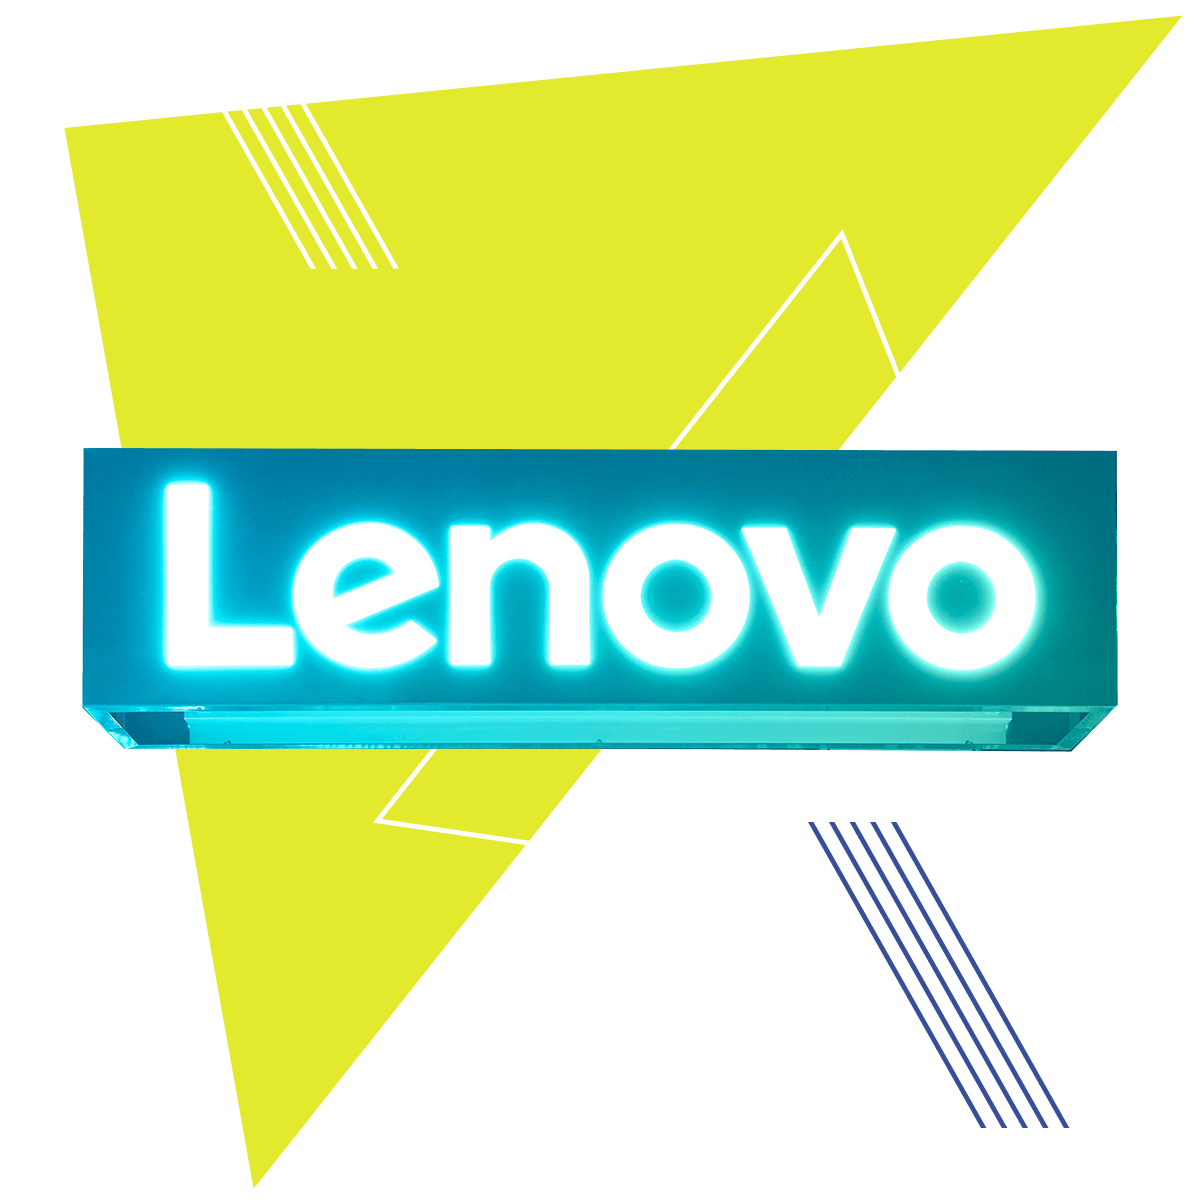 An abstract illustration of the Lenovo LED sign.